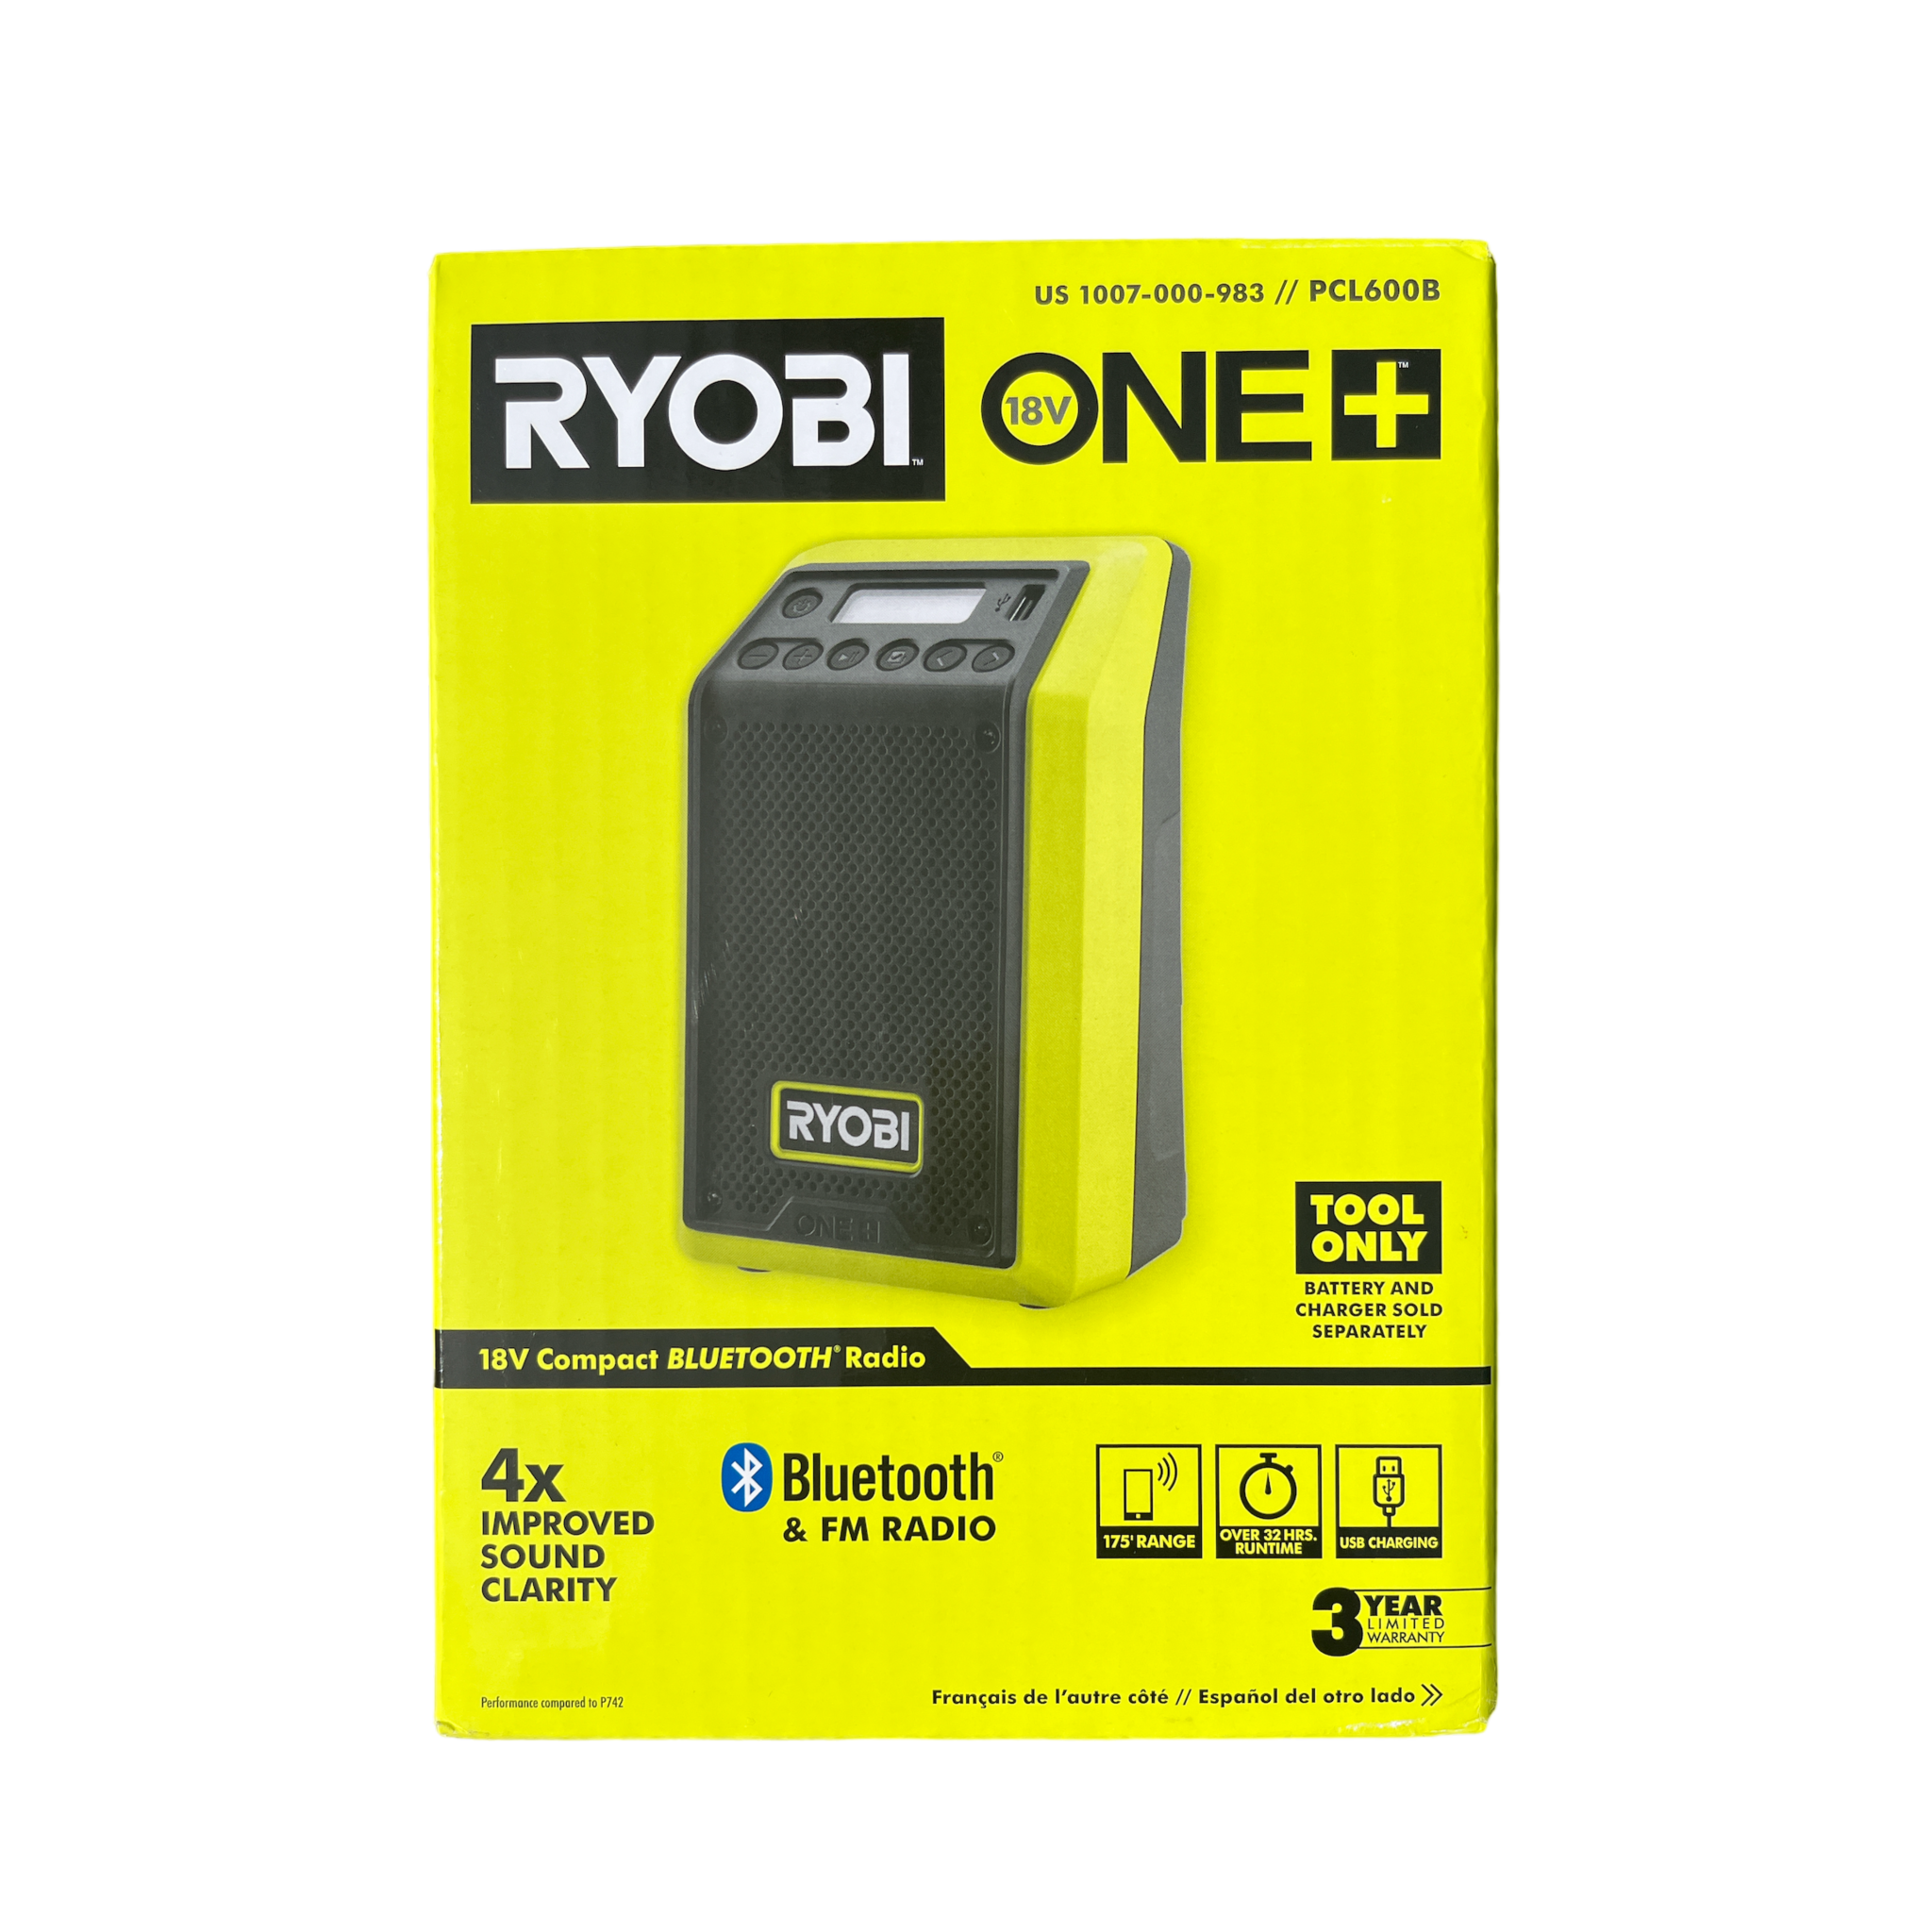 Ryobi One+ 18V Cordless Compact Radio with Bluetooth (Tool Only)